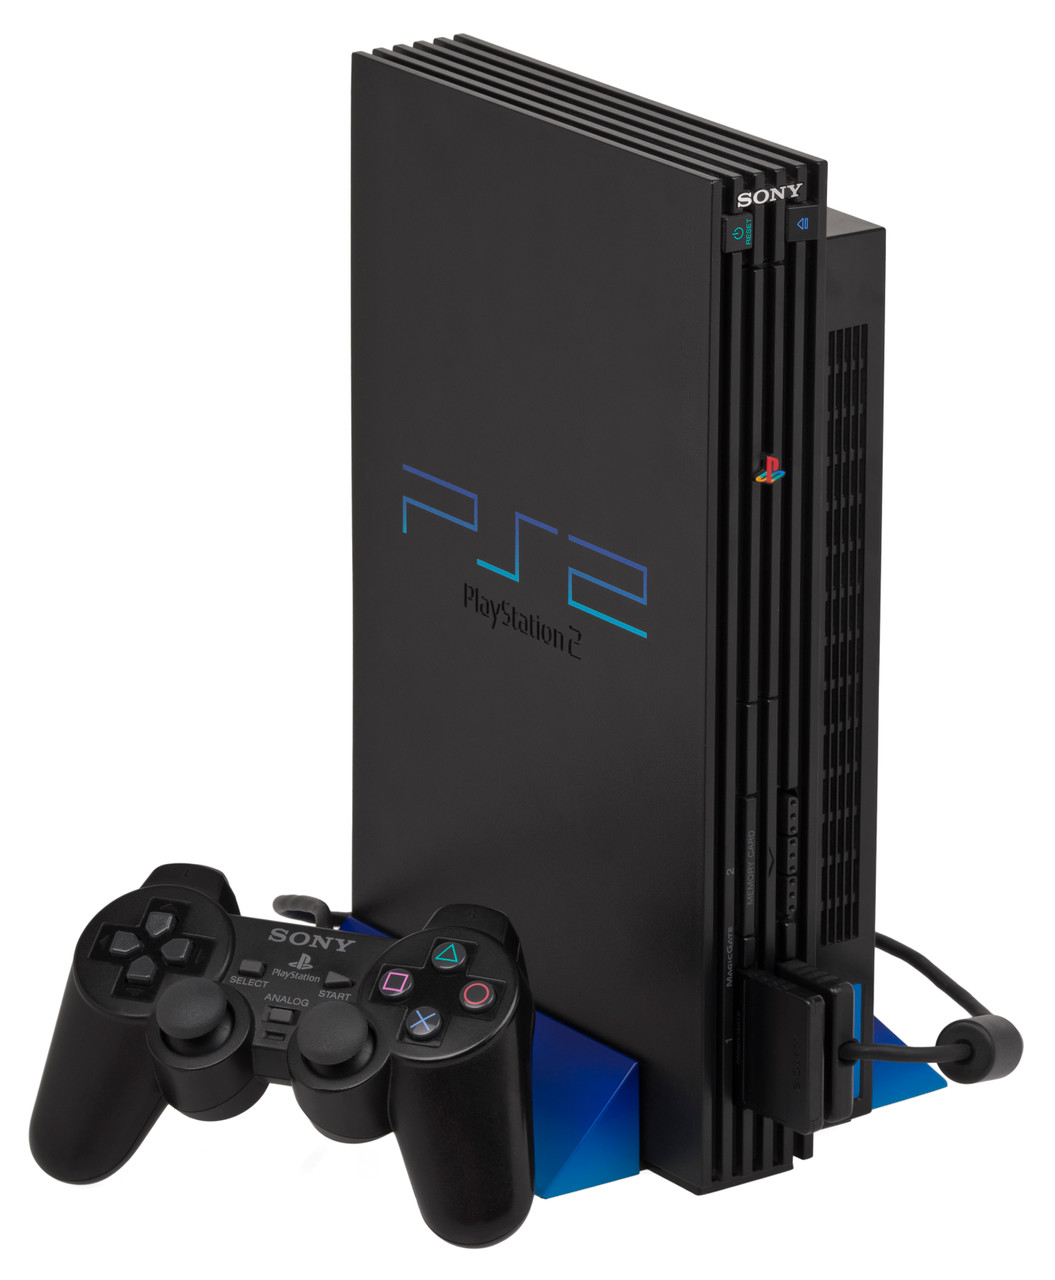 Restored PlayStation 2 Slim Console with Controller and 8MB Memory Card  (Refurbished)